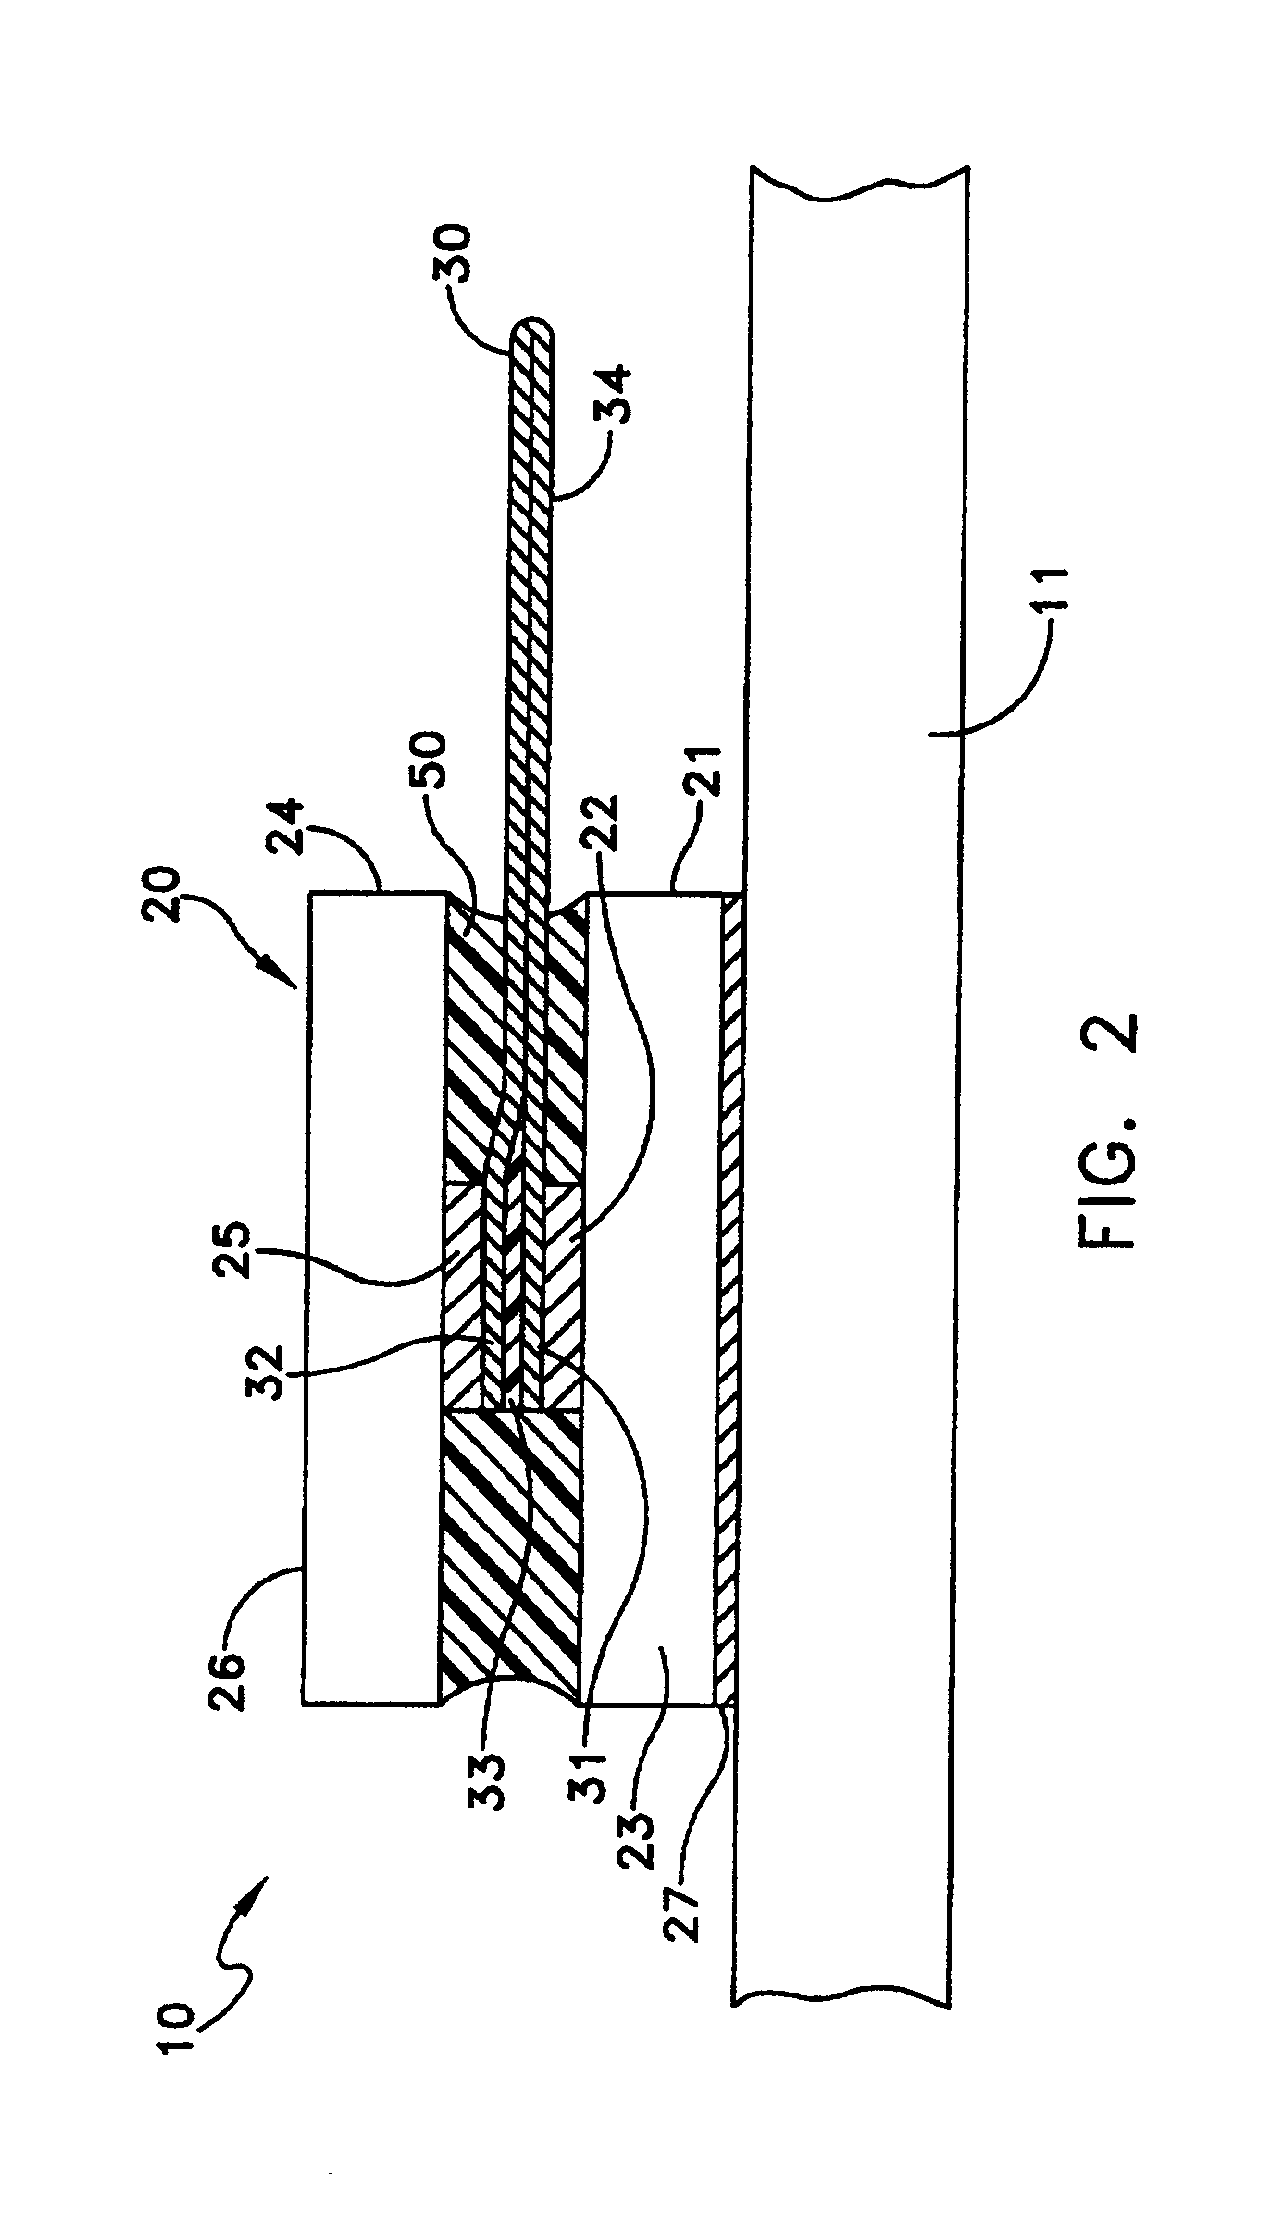 RF switch including diodes with intrinsic regions